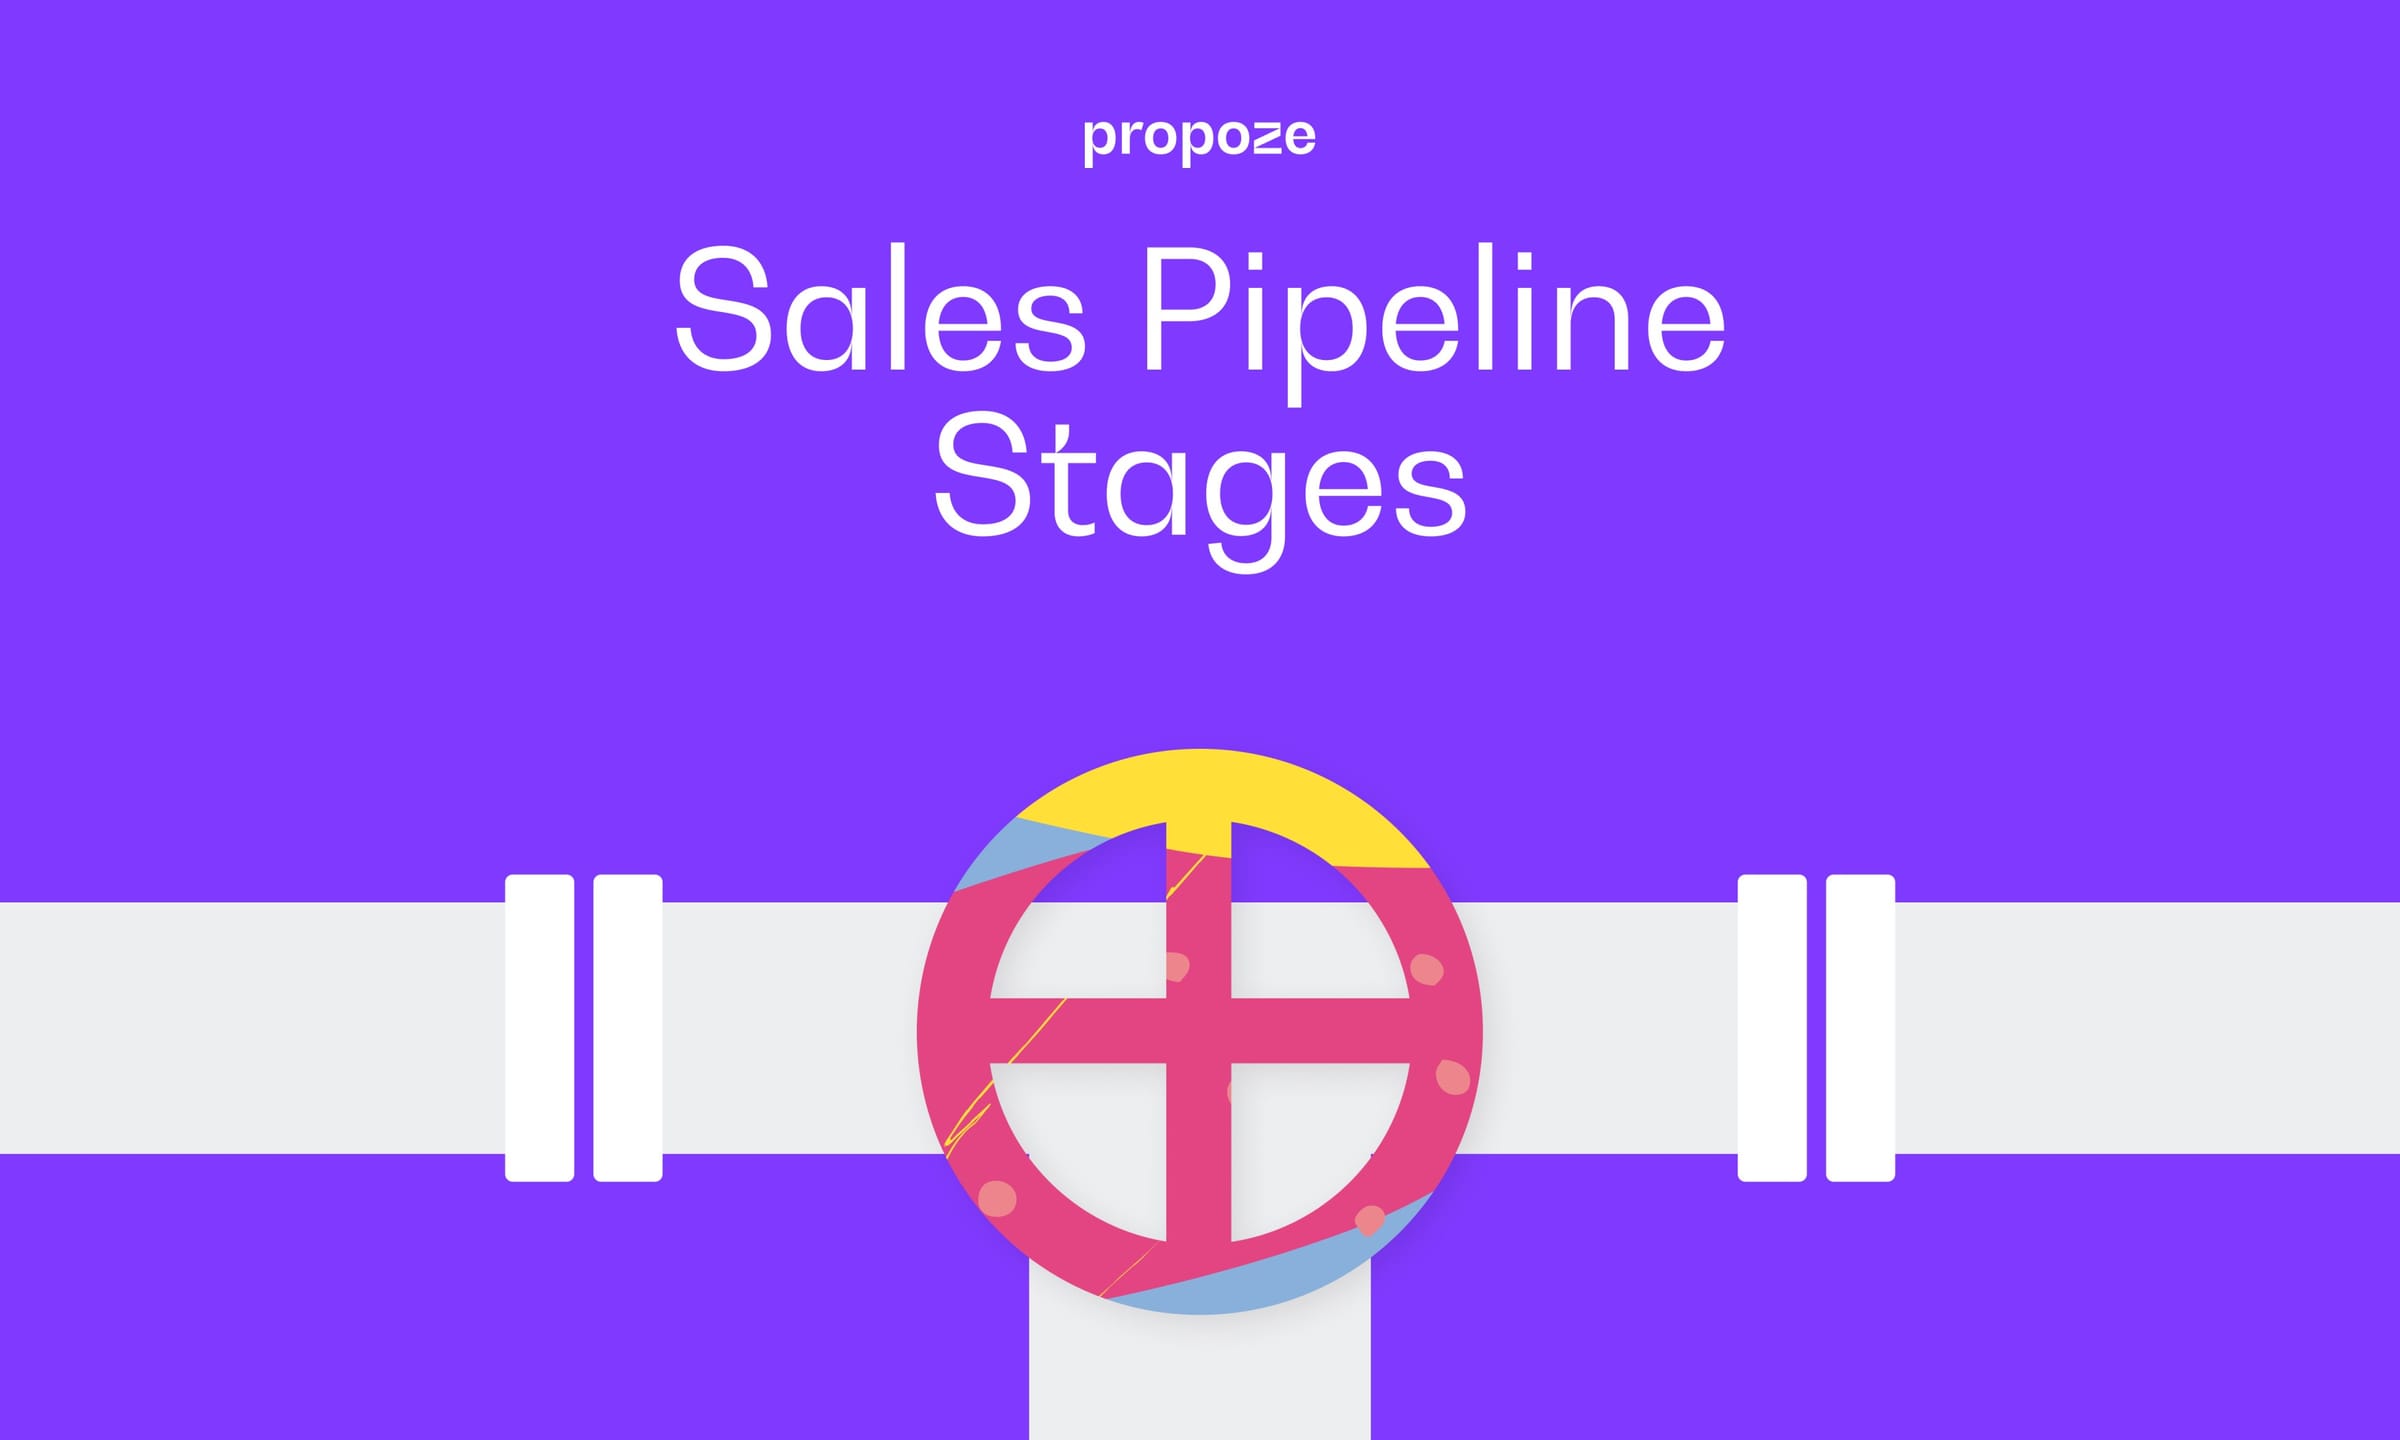 List of 7 must-have B2B sales pipeline stages